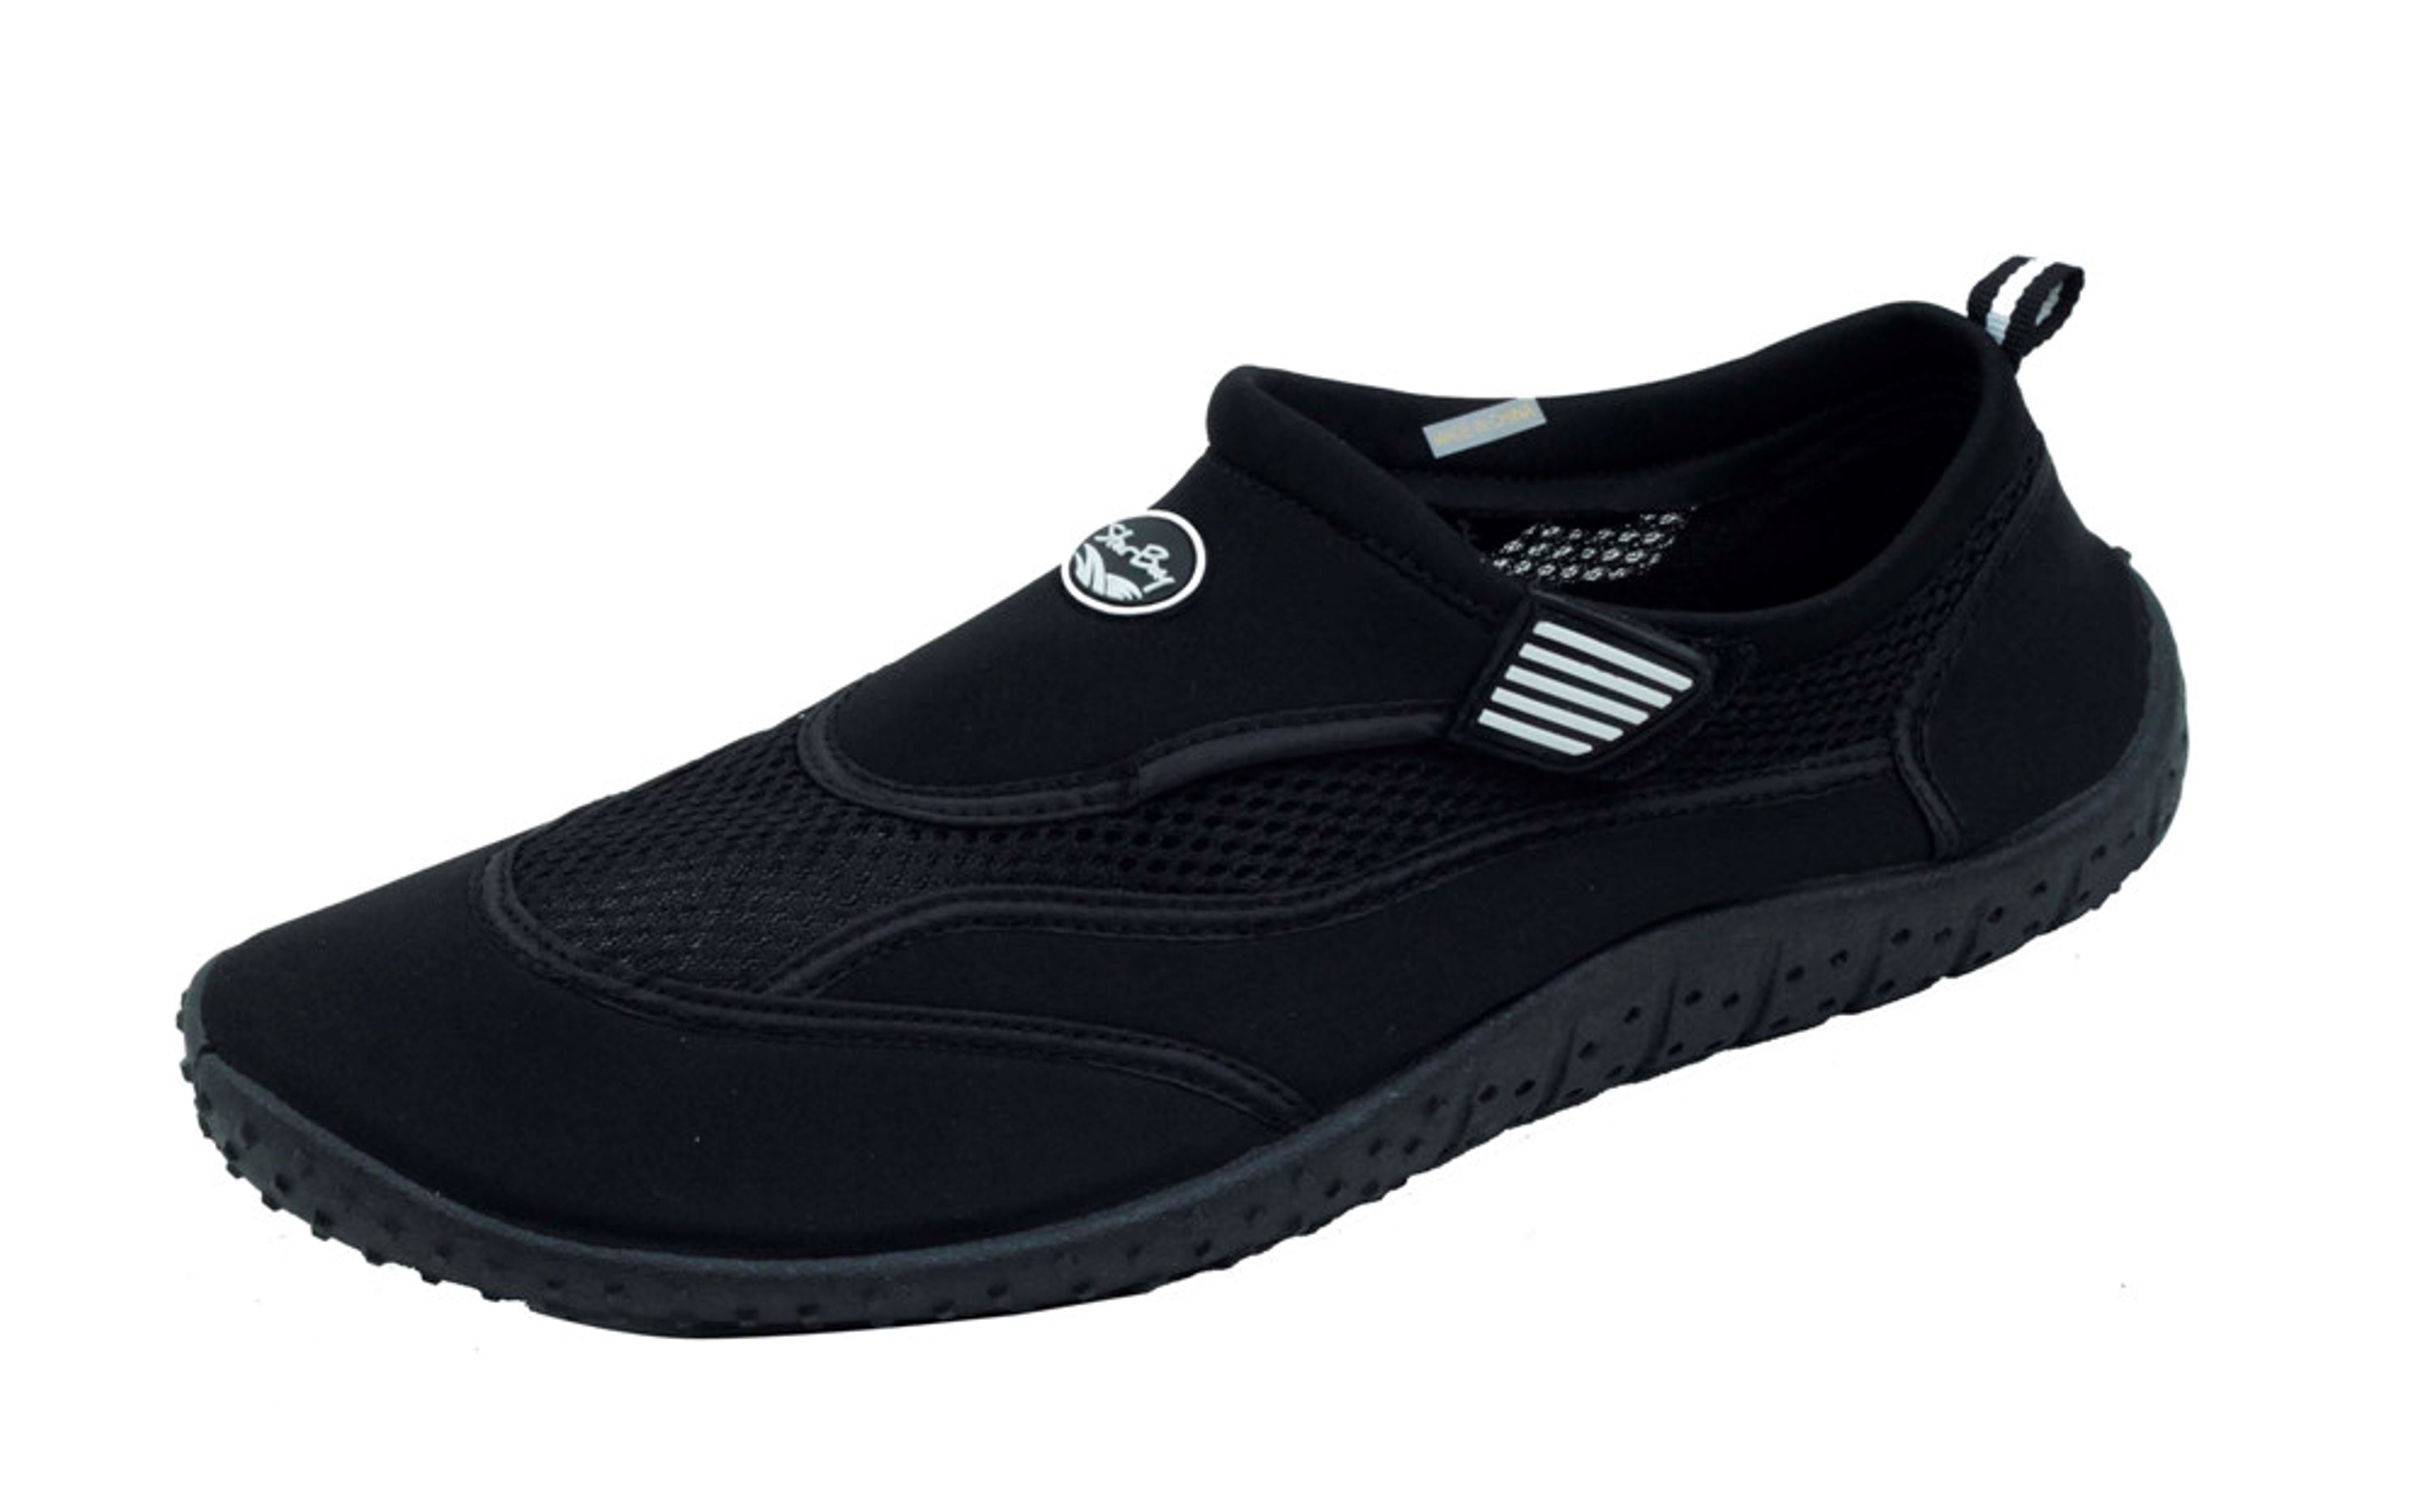 Starbay Men's Slip-On Water Shoes With Adjustable Strap Aqua Socks (#5903) - image 1 of 2